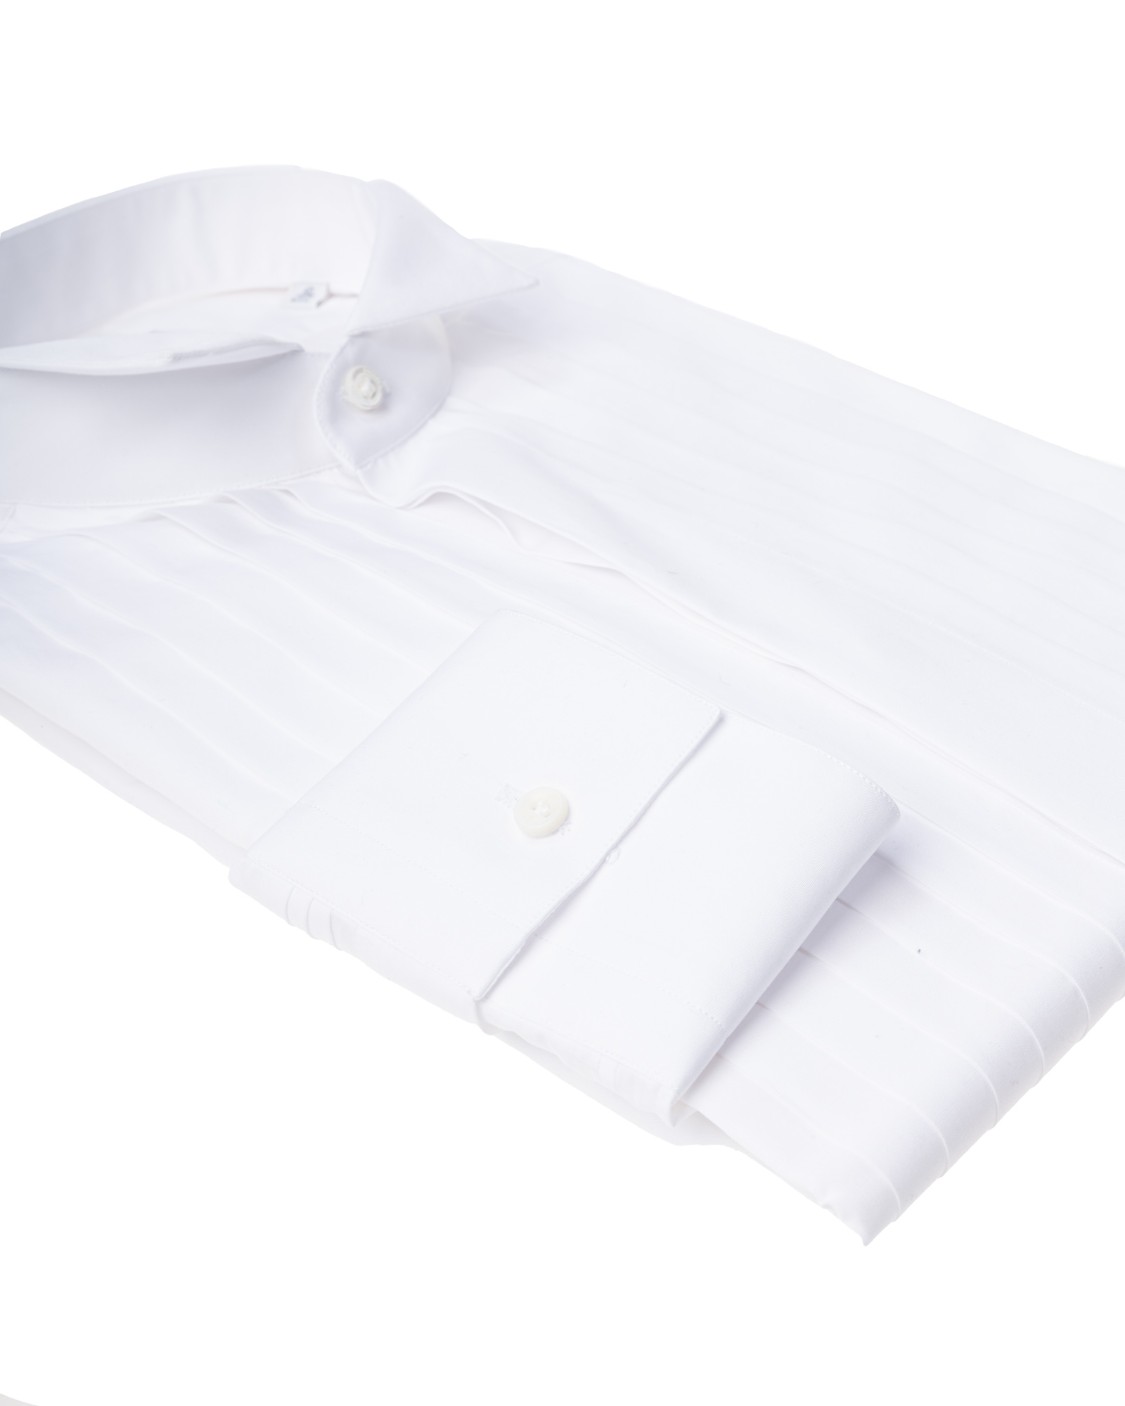 shop BAGUTTA  Shirt: Bagutta white tuxedo shirt.
Simple wrist.
Pleating on the front.
Hidden buttoning.
Diplomatic collar.
Composition: 100% Cotton.
Made in Italy.. BPARIGIV CN0170-001 number 3046427